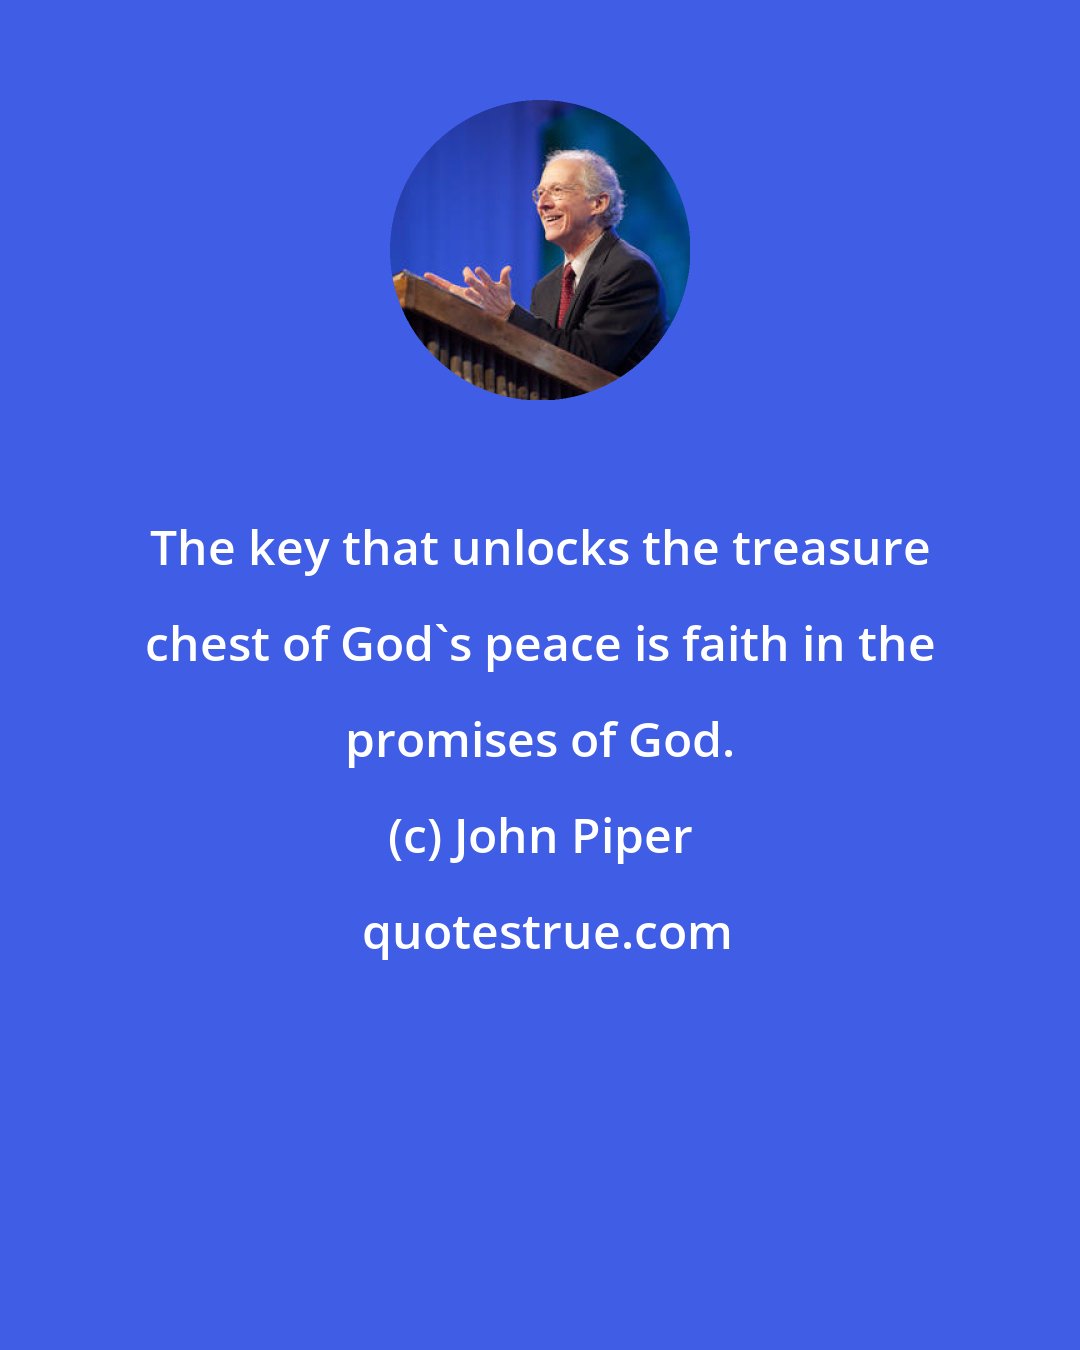 John Piper: The key that unlocks the treasure chest of God's peace is faith in the promises of God.